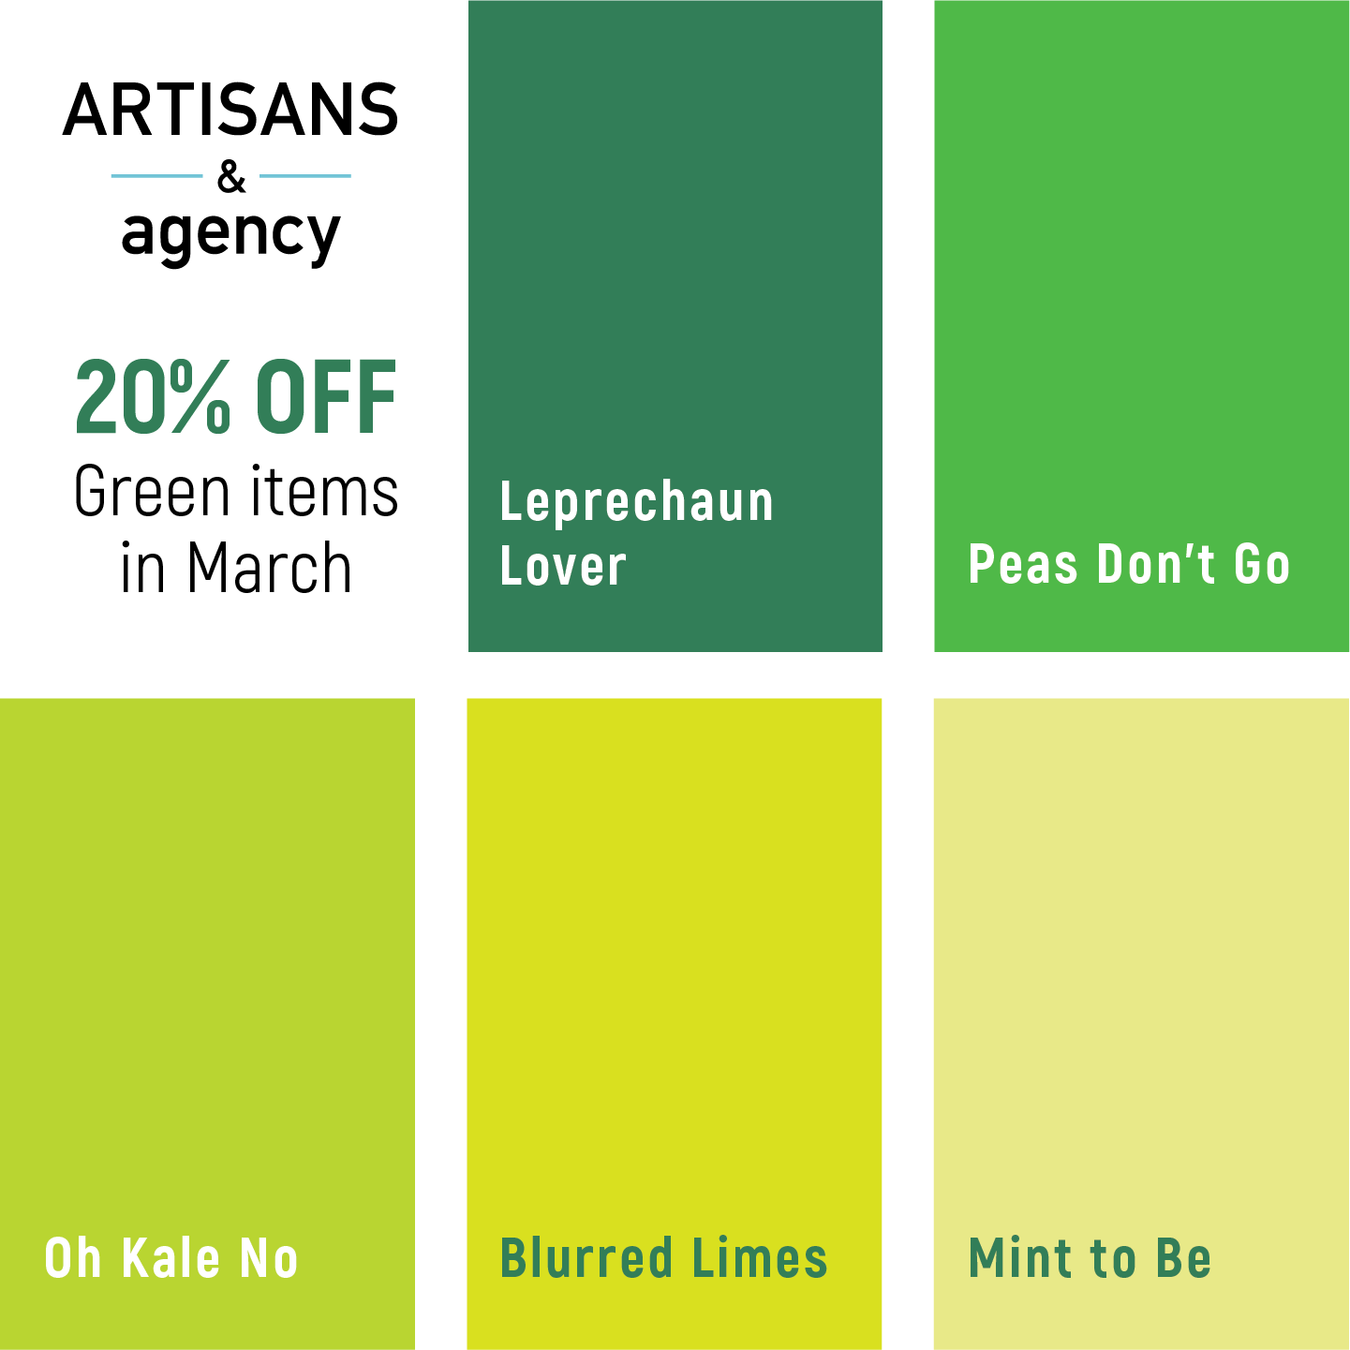 Save 20% March color is Green